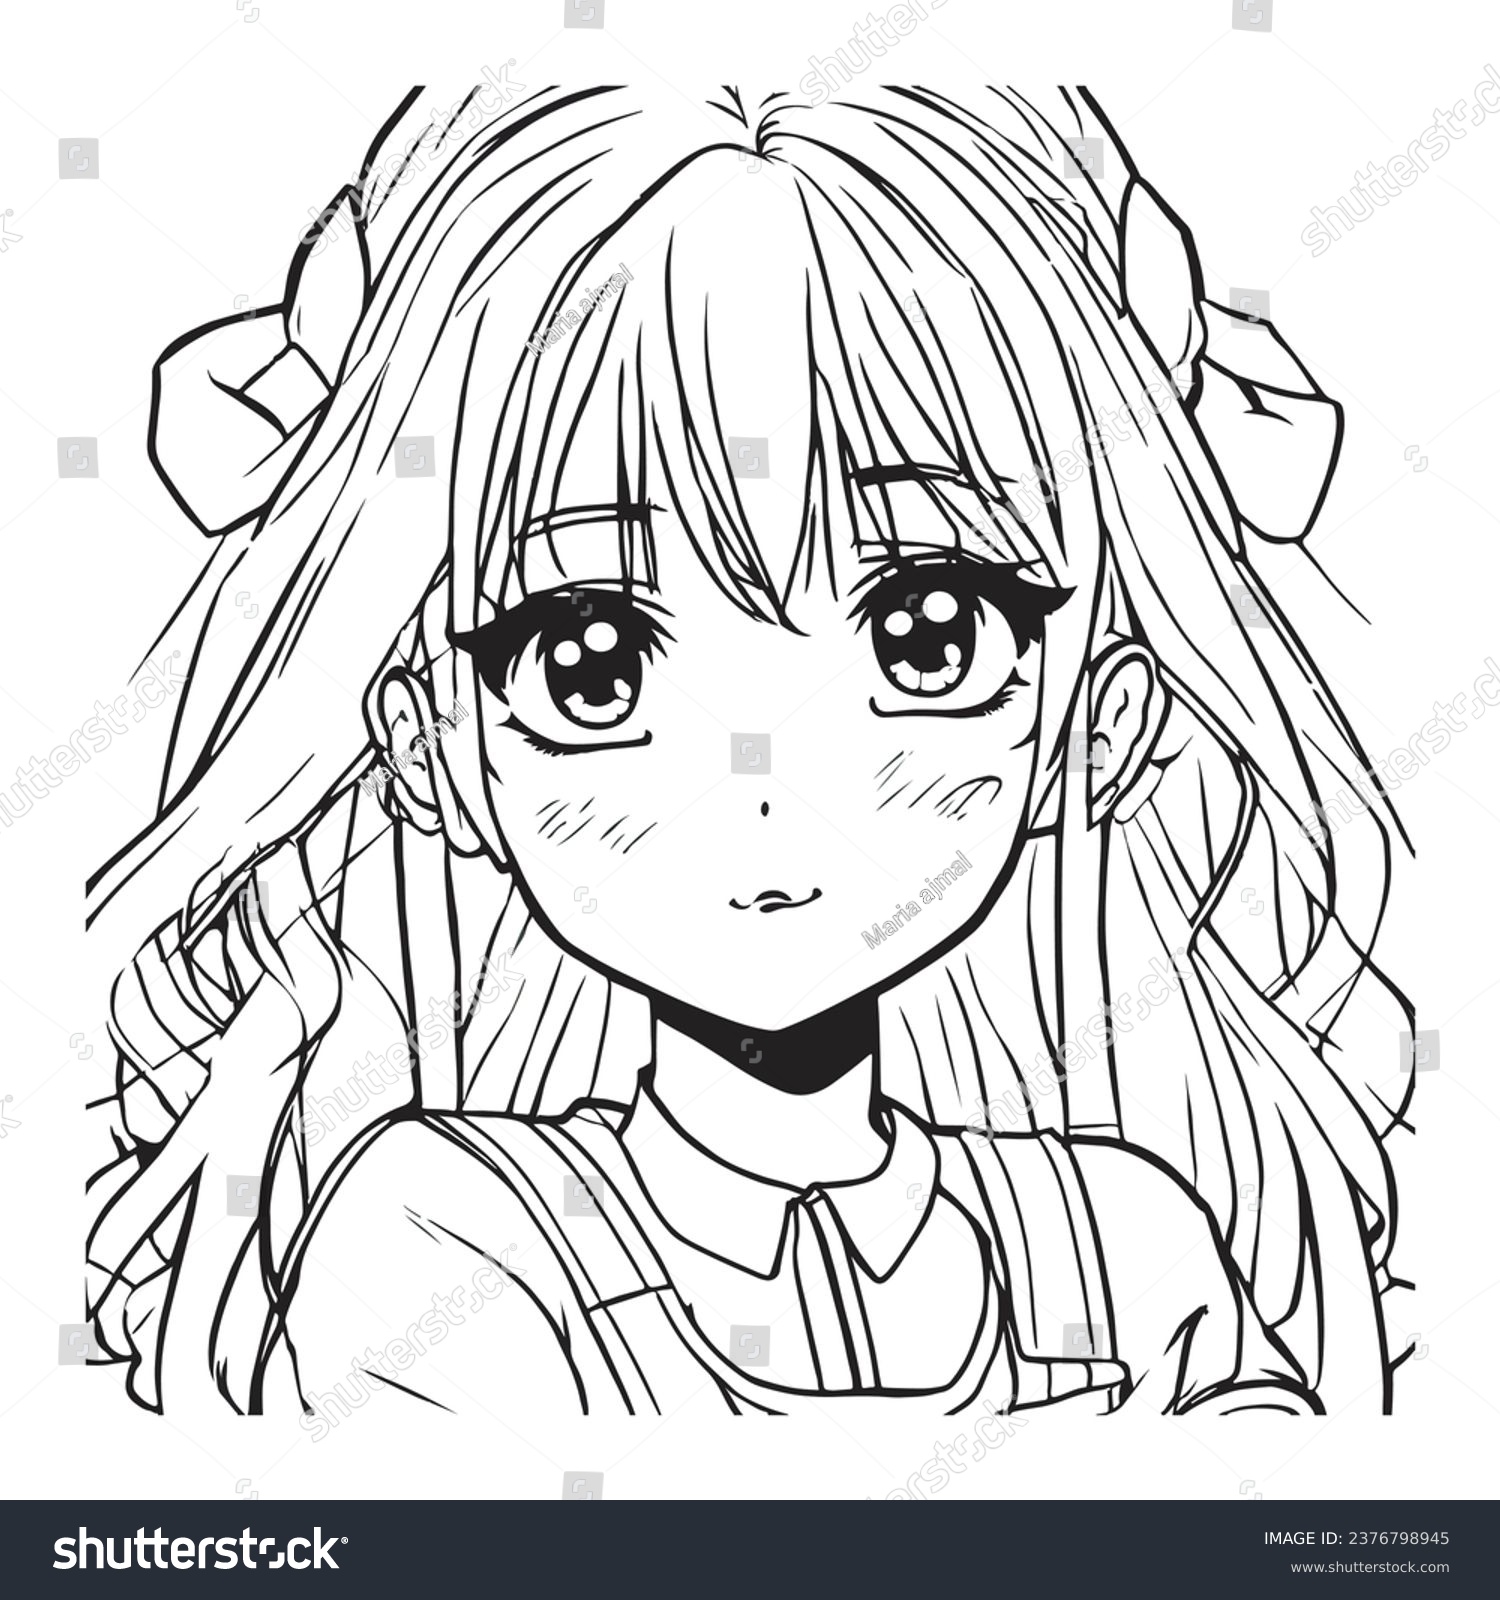 Anime coloring pages images stock photos d objects vectors